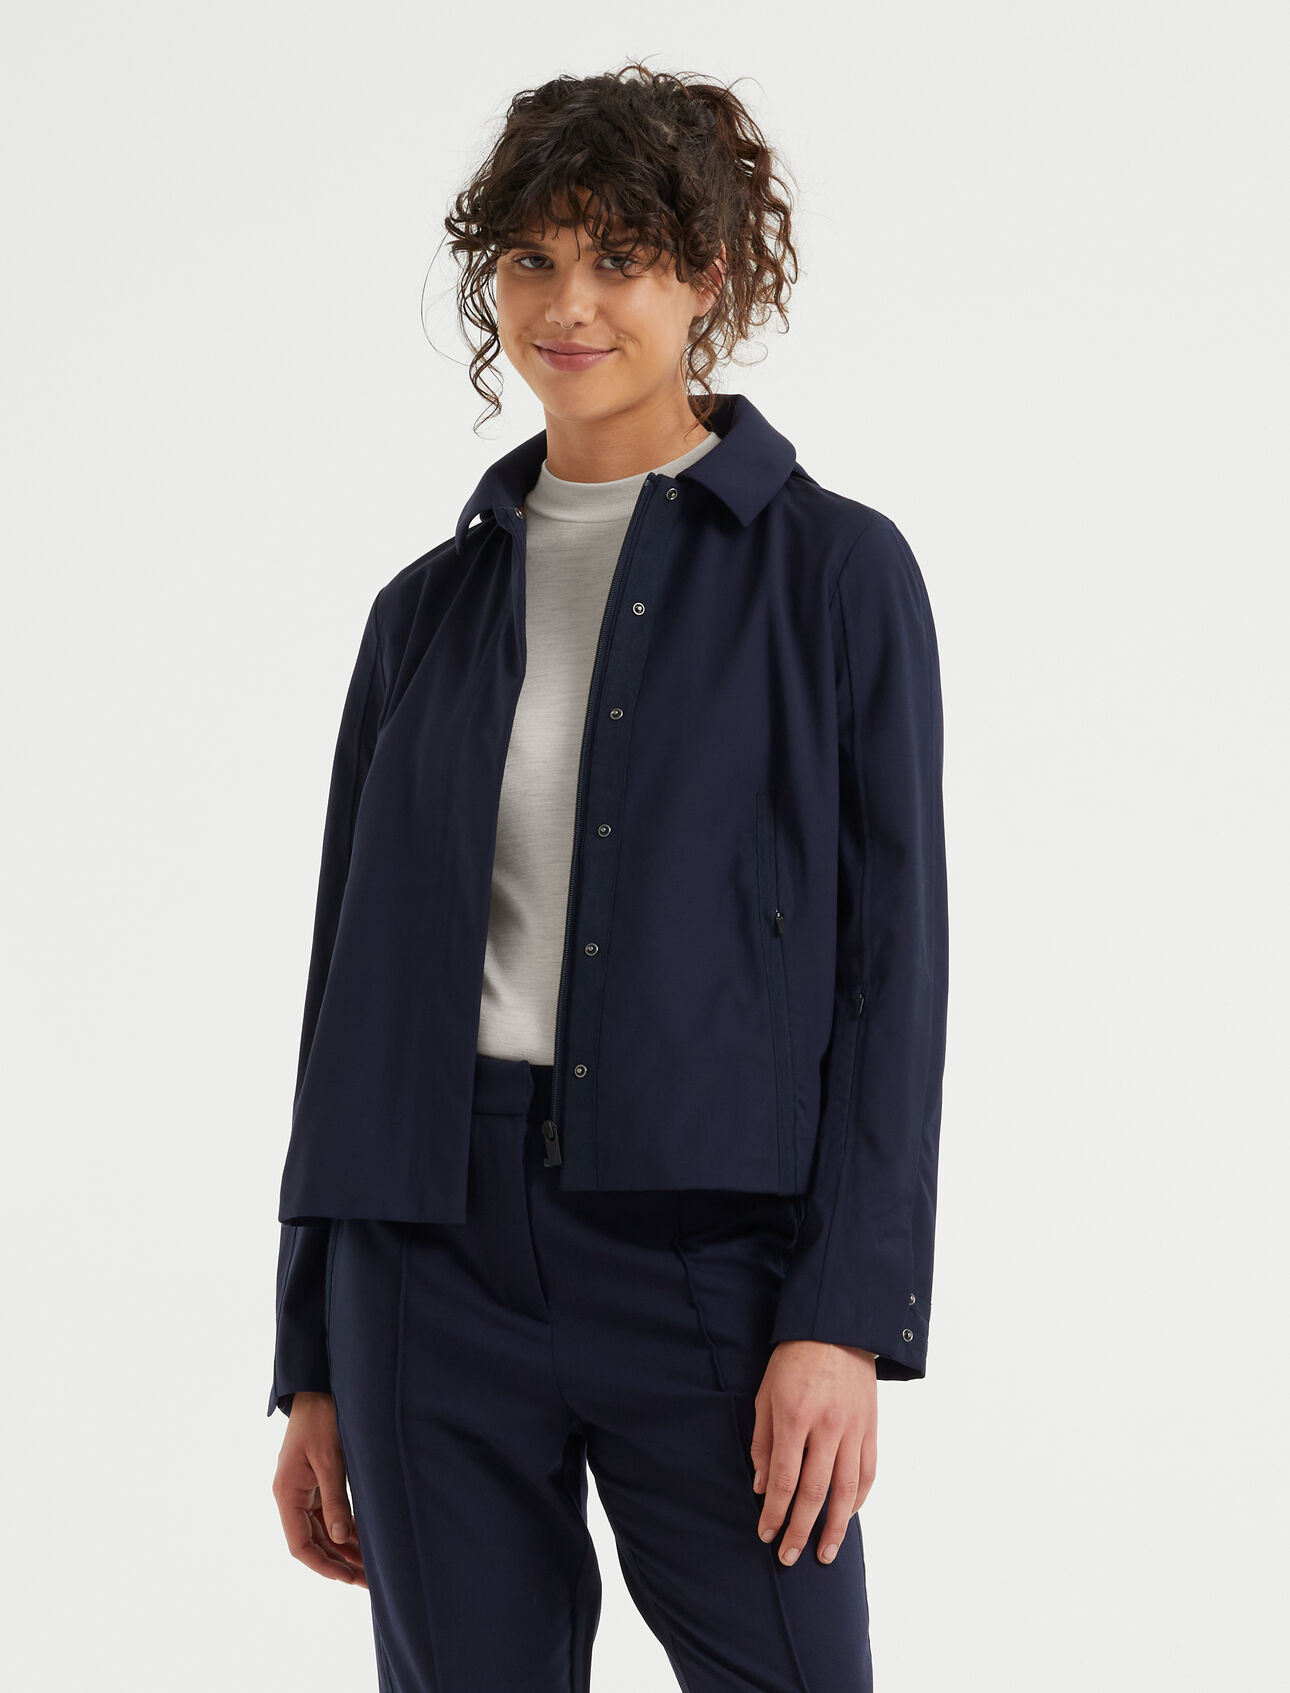 Womens Merino Hooded Jacket A lightweight woven jacket made with a 100% merino wool outer and lined withour breathable Cool-Lite™jersey fabric, the Merino Hooded Jacket is a timeless design made for city excursions.